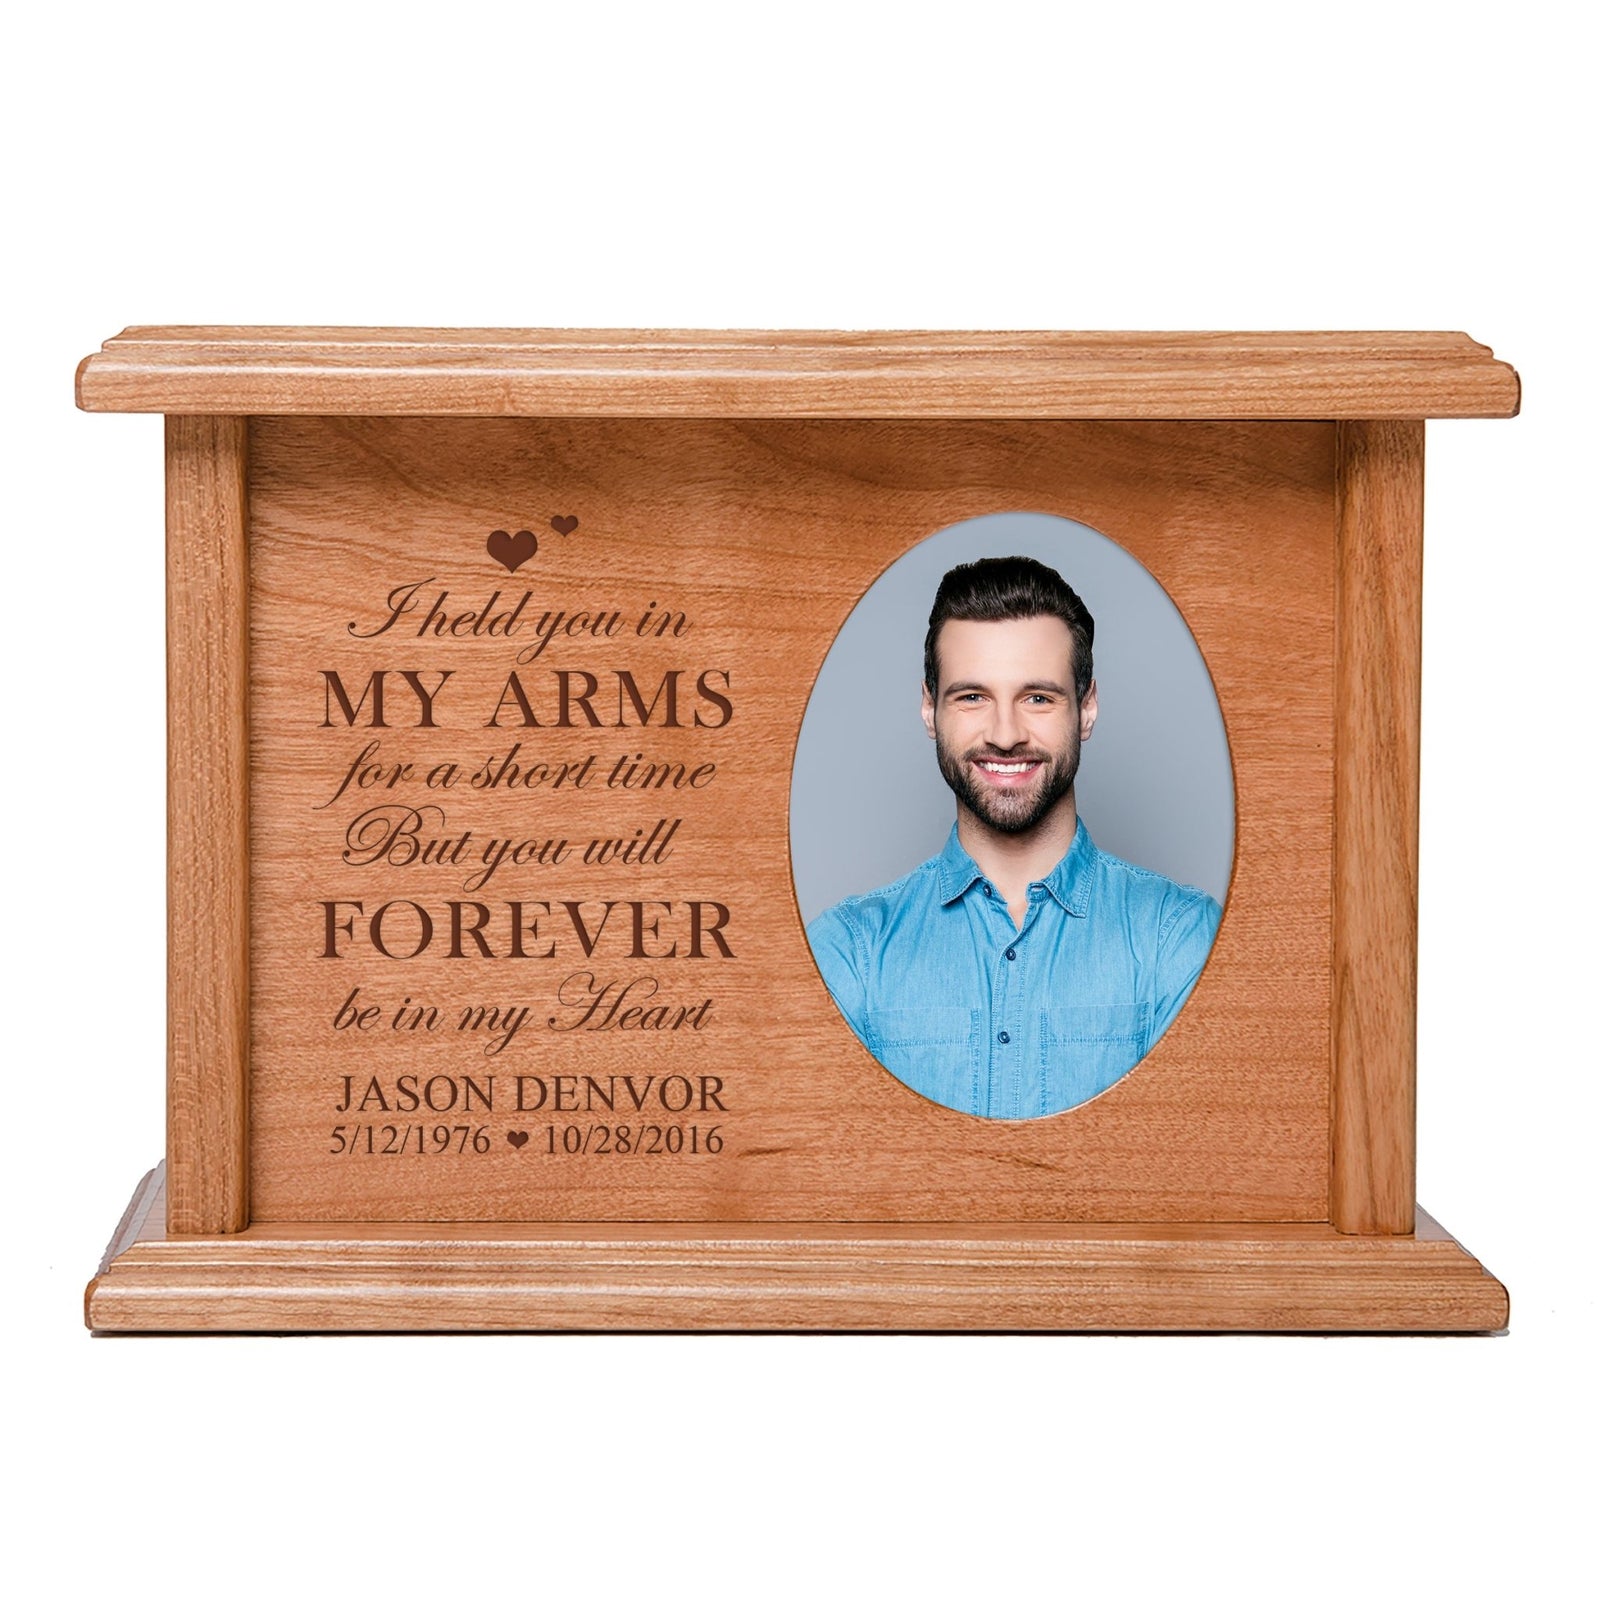 Custom Memorial Cremation Urn Box for Human Ashes holds 2x3 photo and holds 65 cu in I Held You - LifeSong Milestones